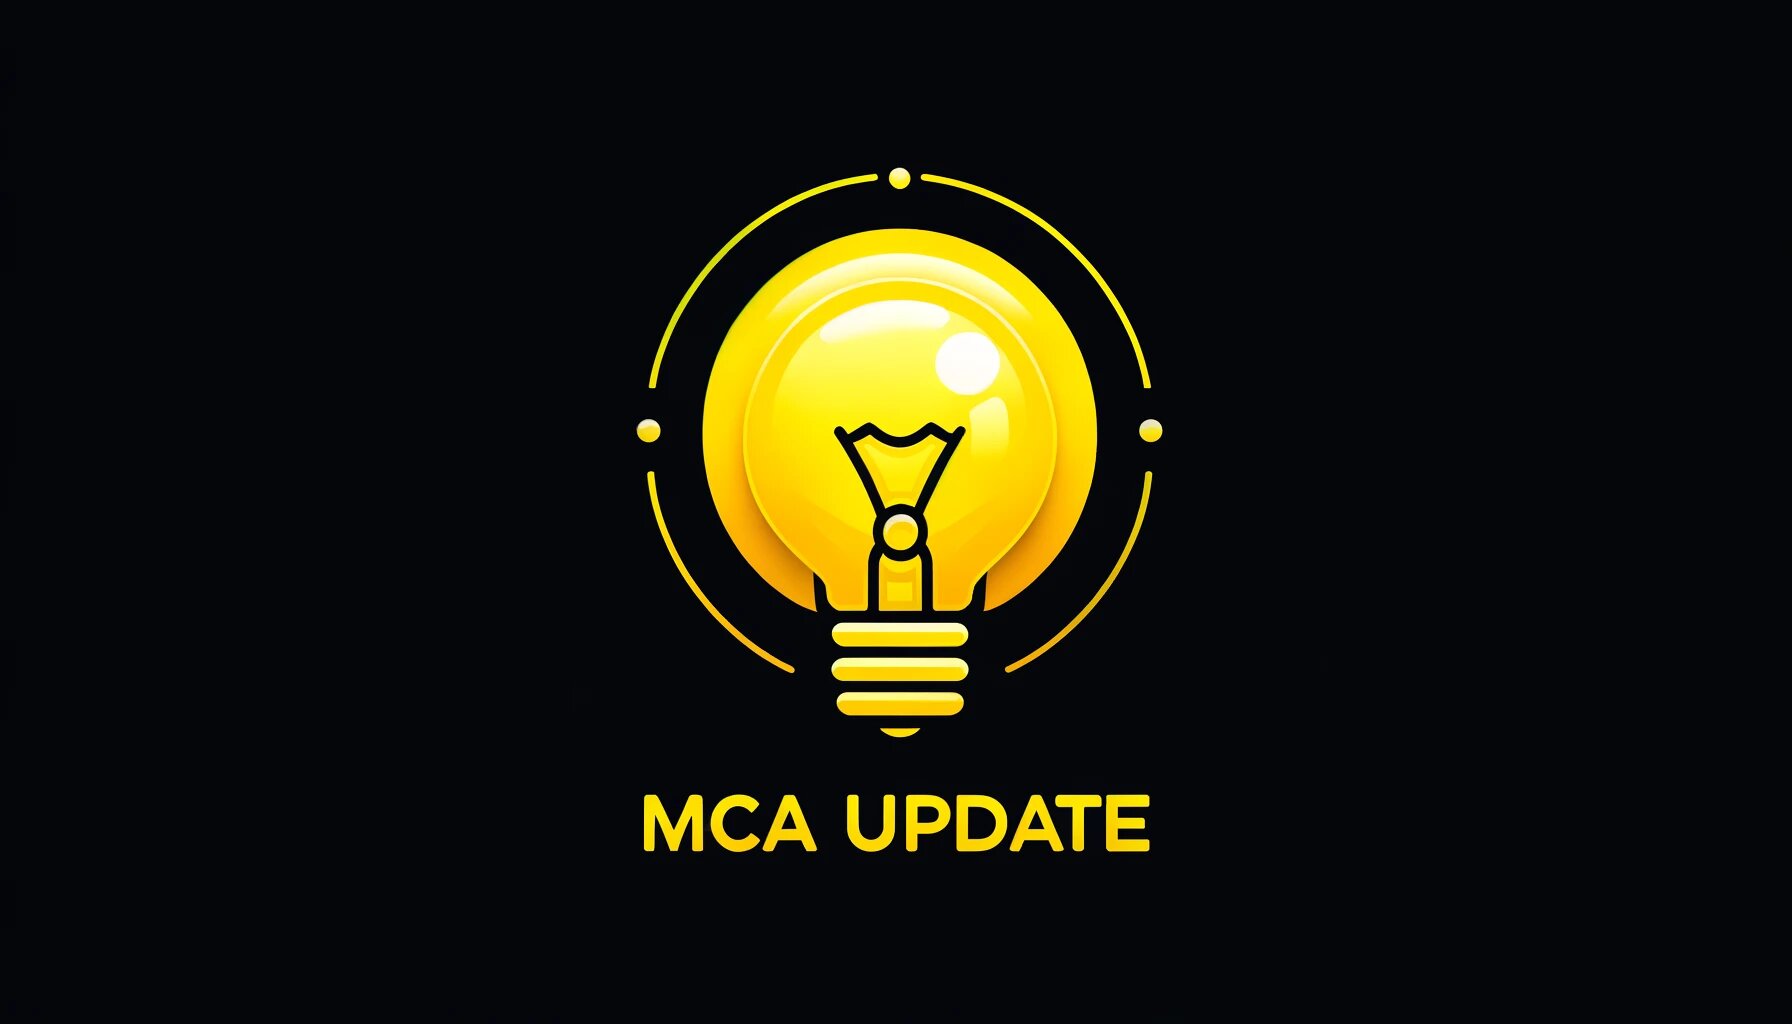 Extended Deadlines and Fee Waivers for LLP Forms BEN-2 and 4D Announced by MCA